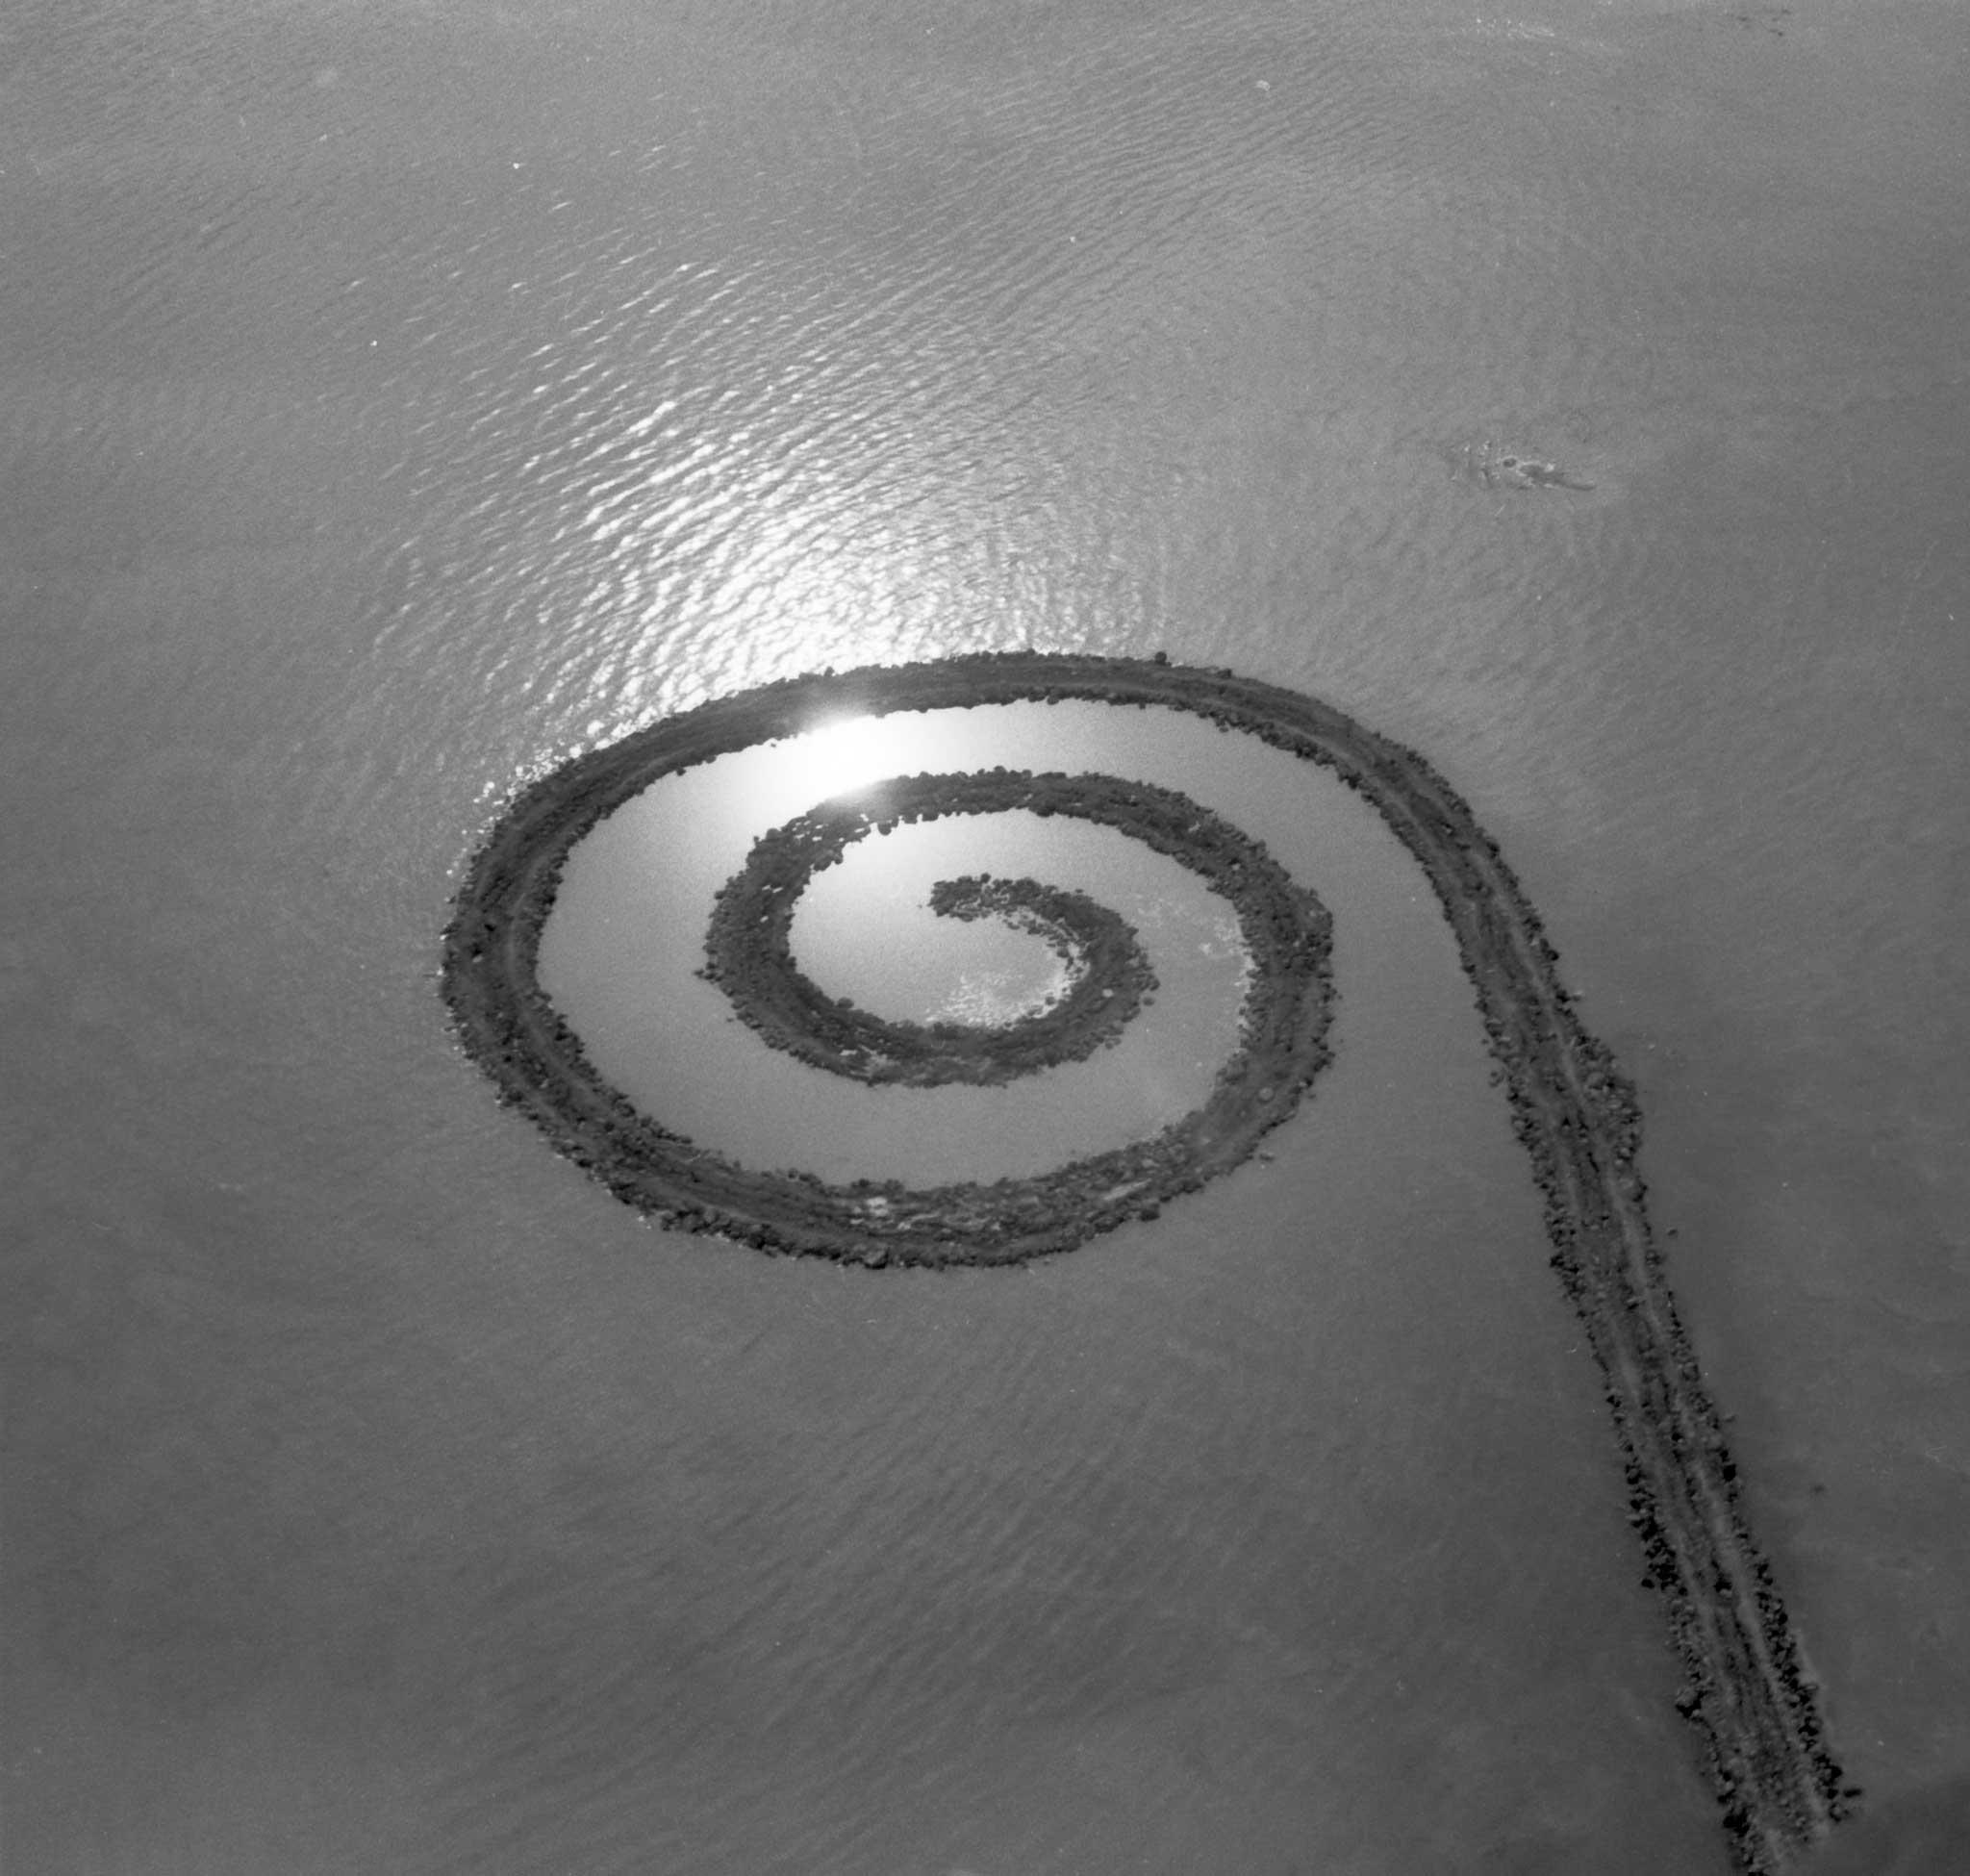 black and white, aerial image or an earthen jetty with a spiral termination extending into a body of water 